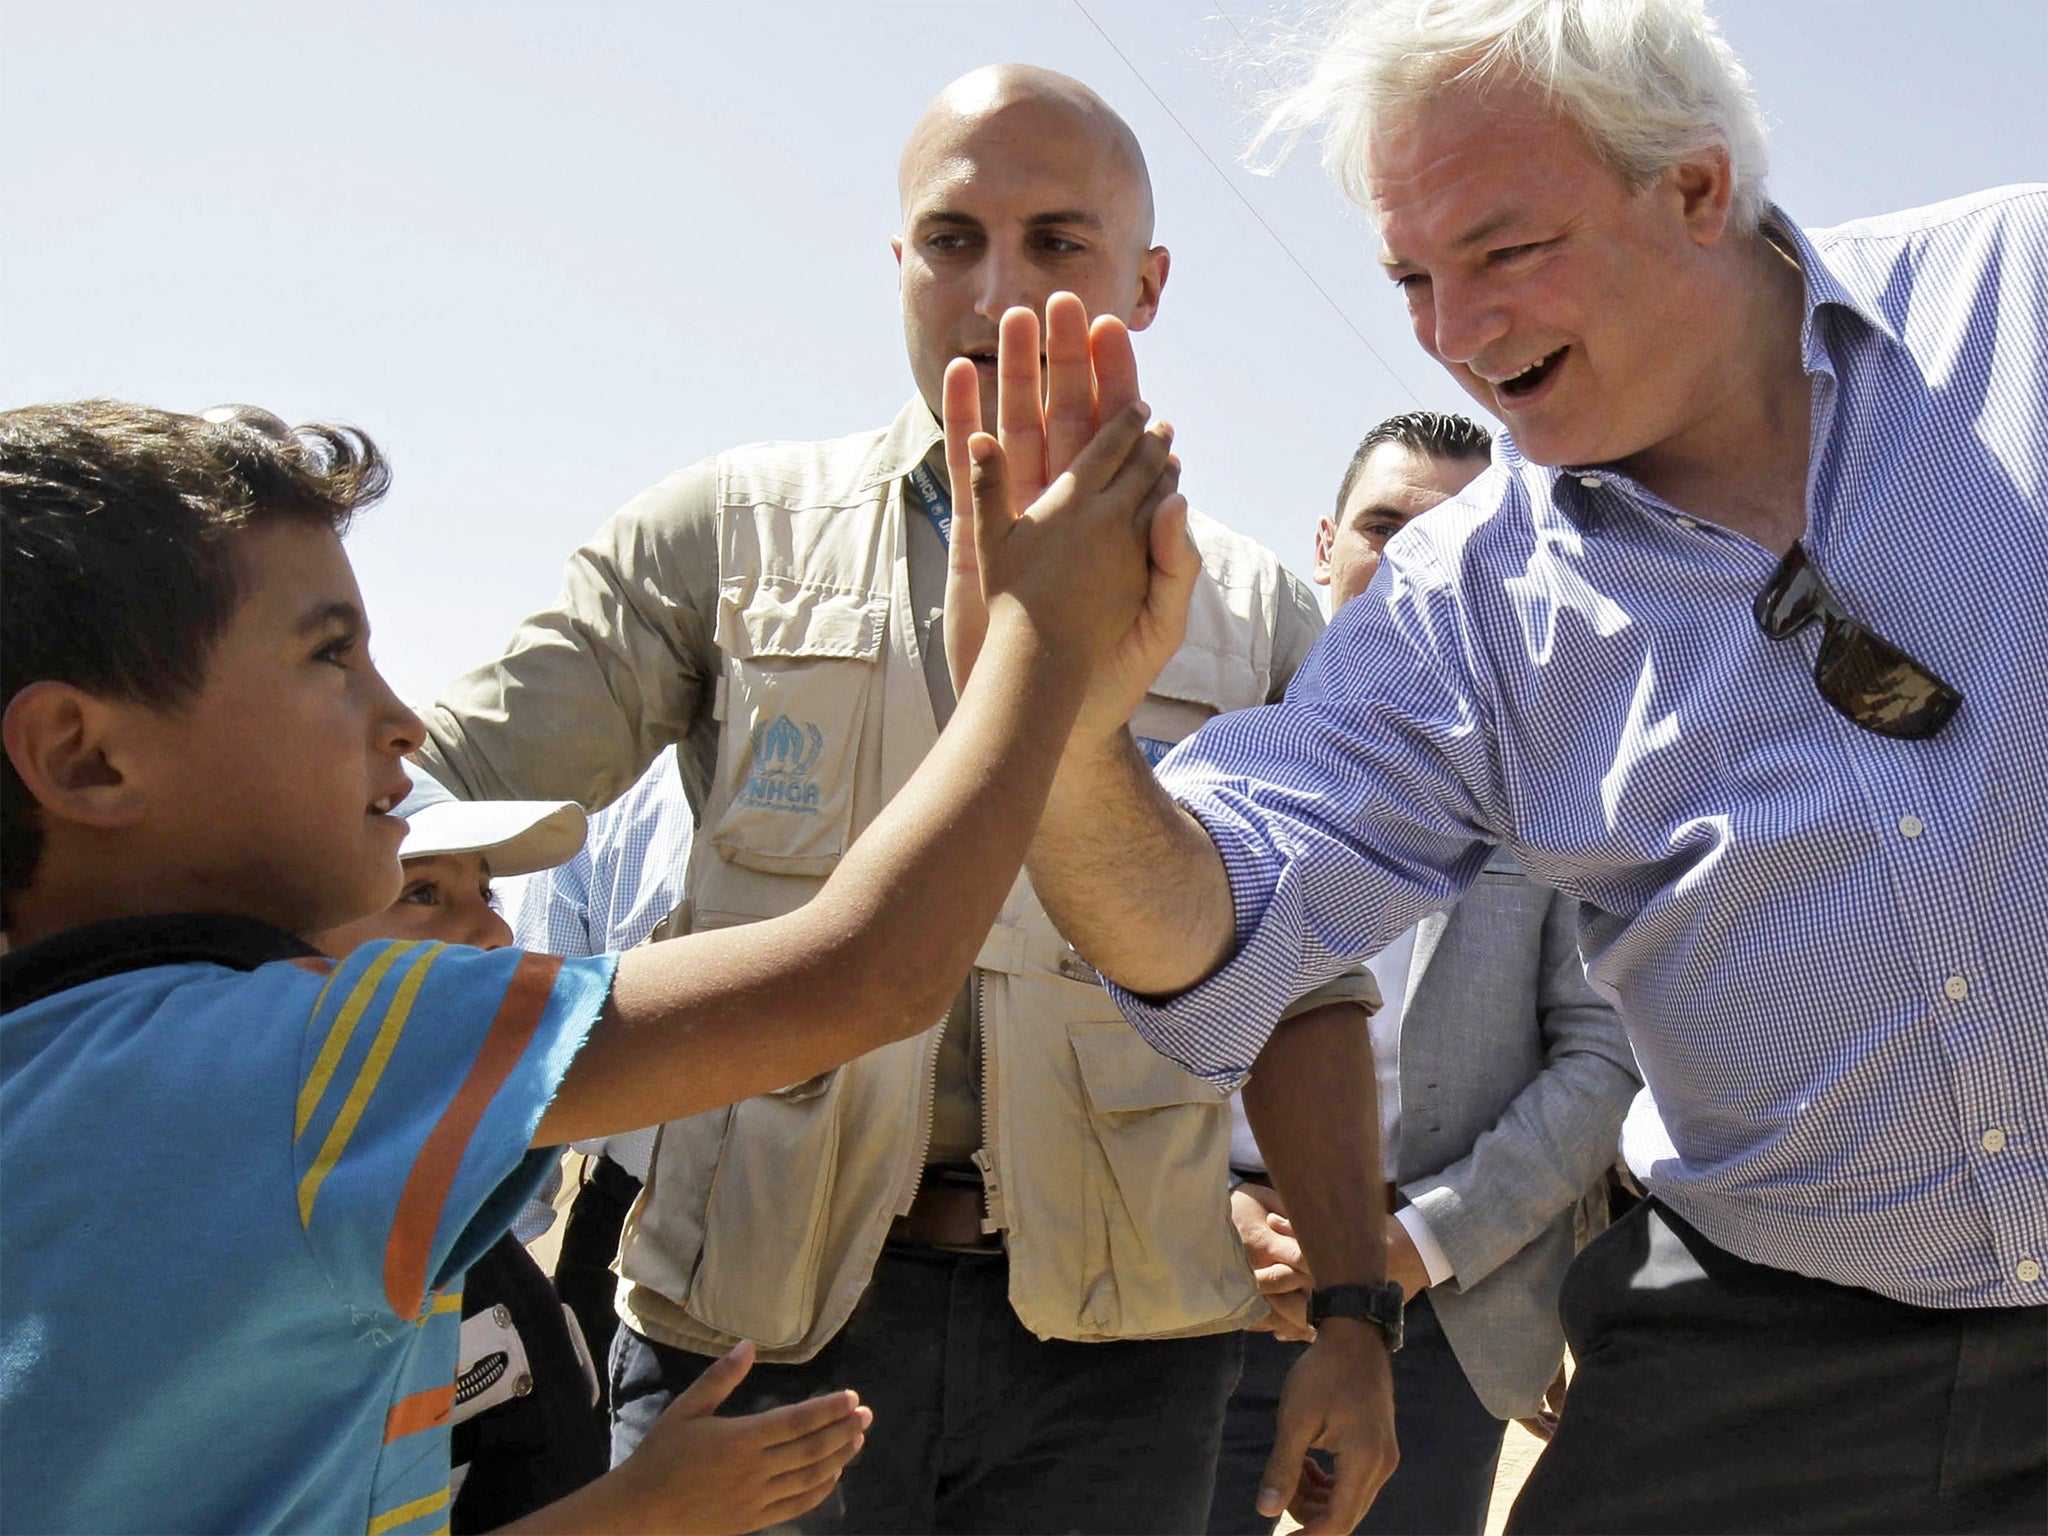 The UN’s humanitarian chief Stephen O’Brien greets a young Syrian refugee at the Zaatari camp in Jordan in September